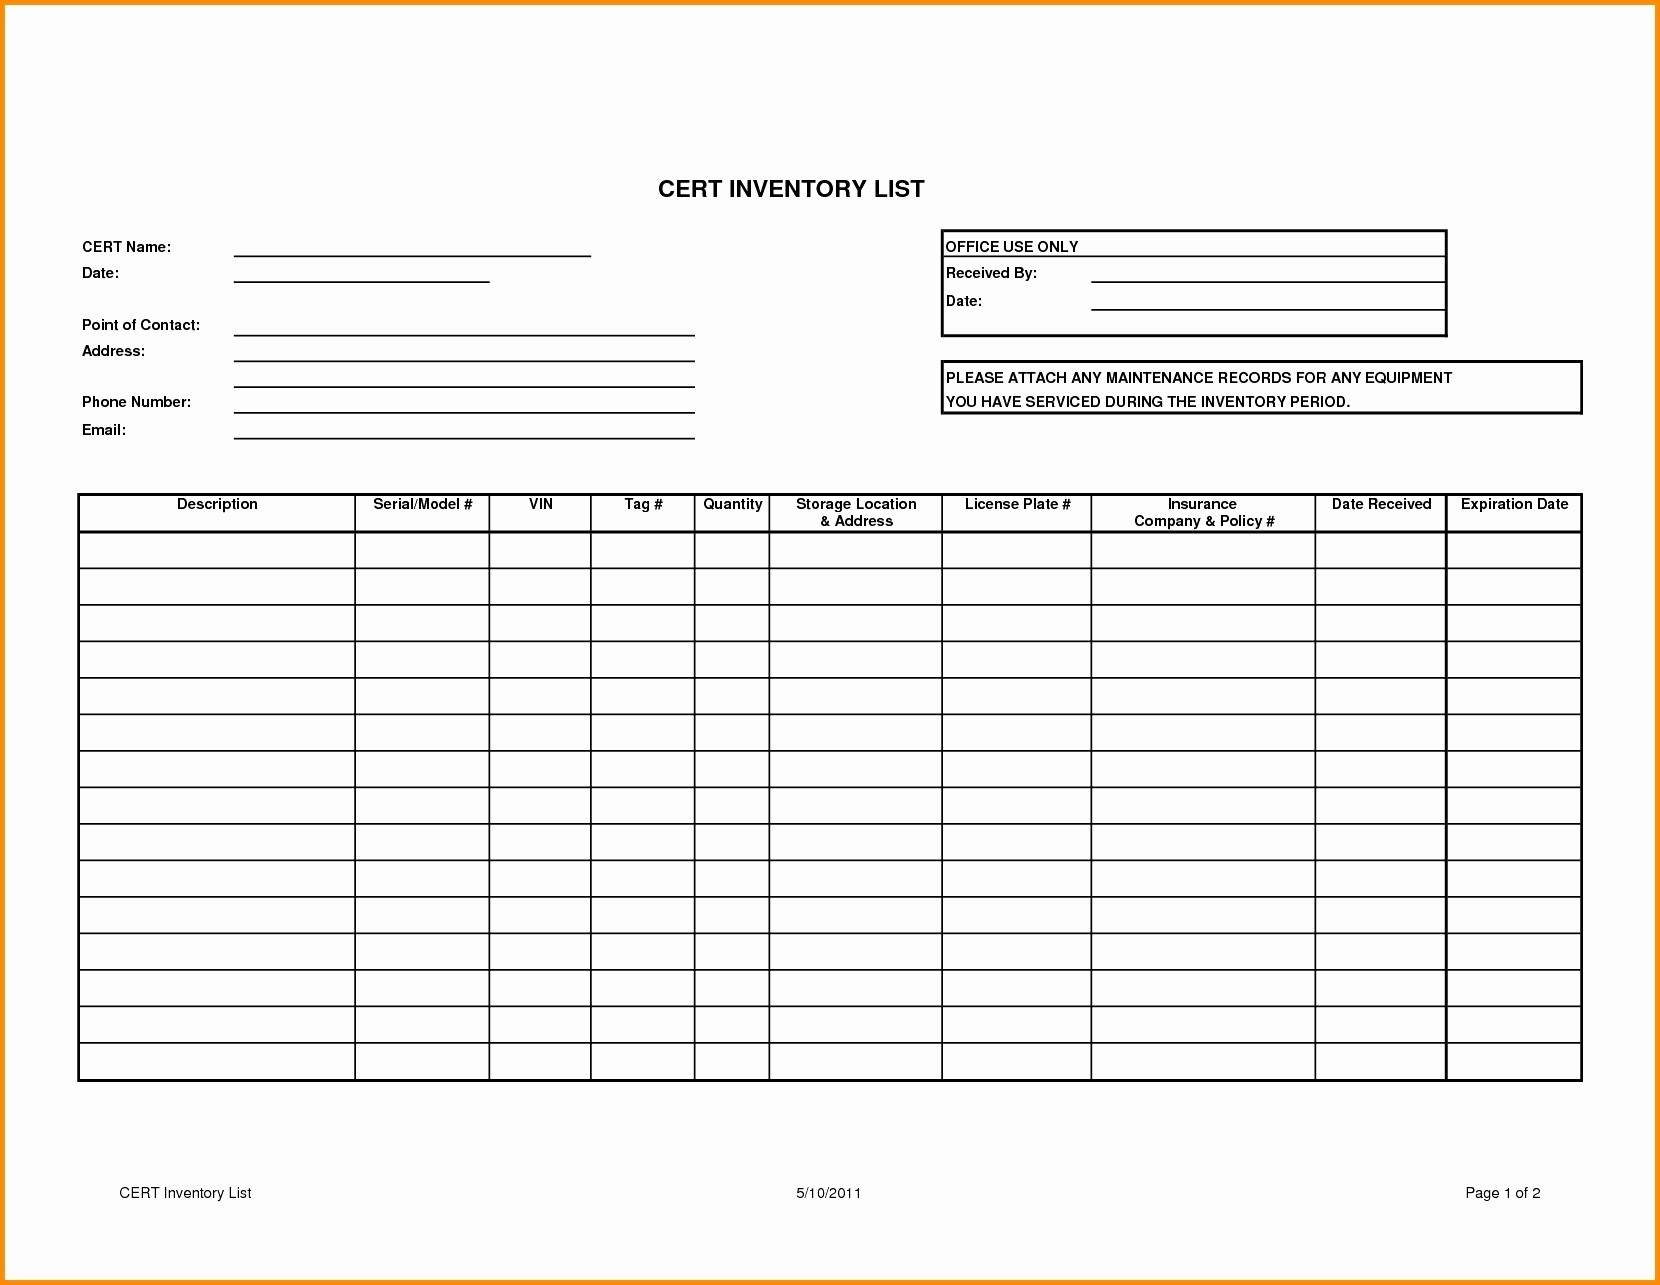 Cow Calf Inventory Spreadsheet On Free Microsoft Document Cattle